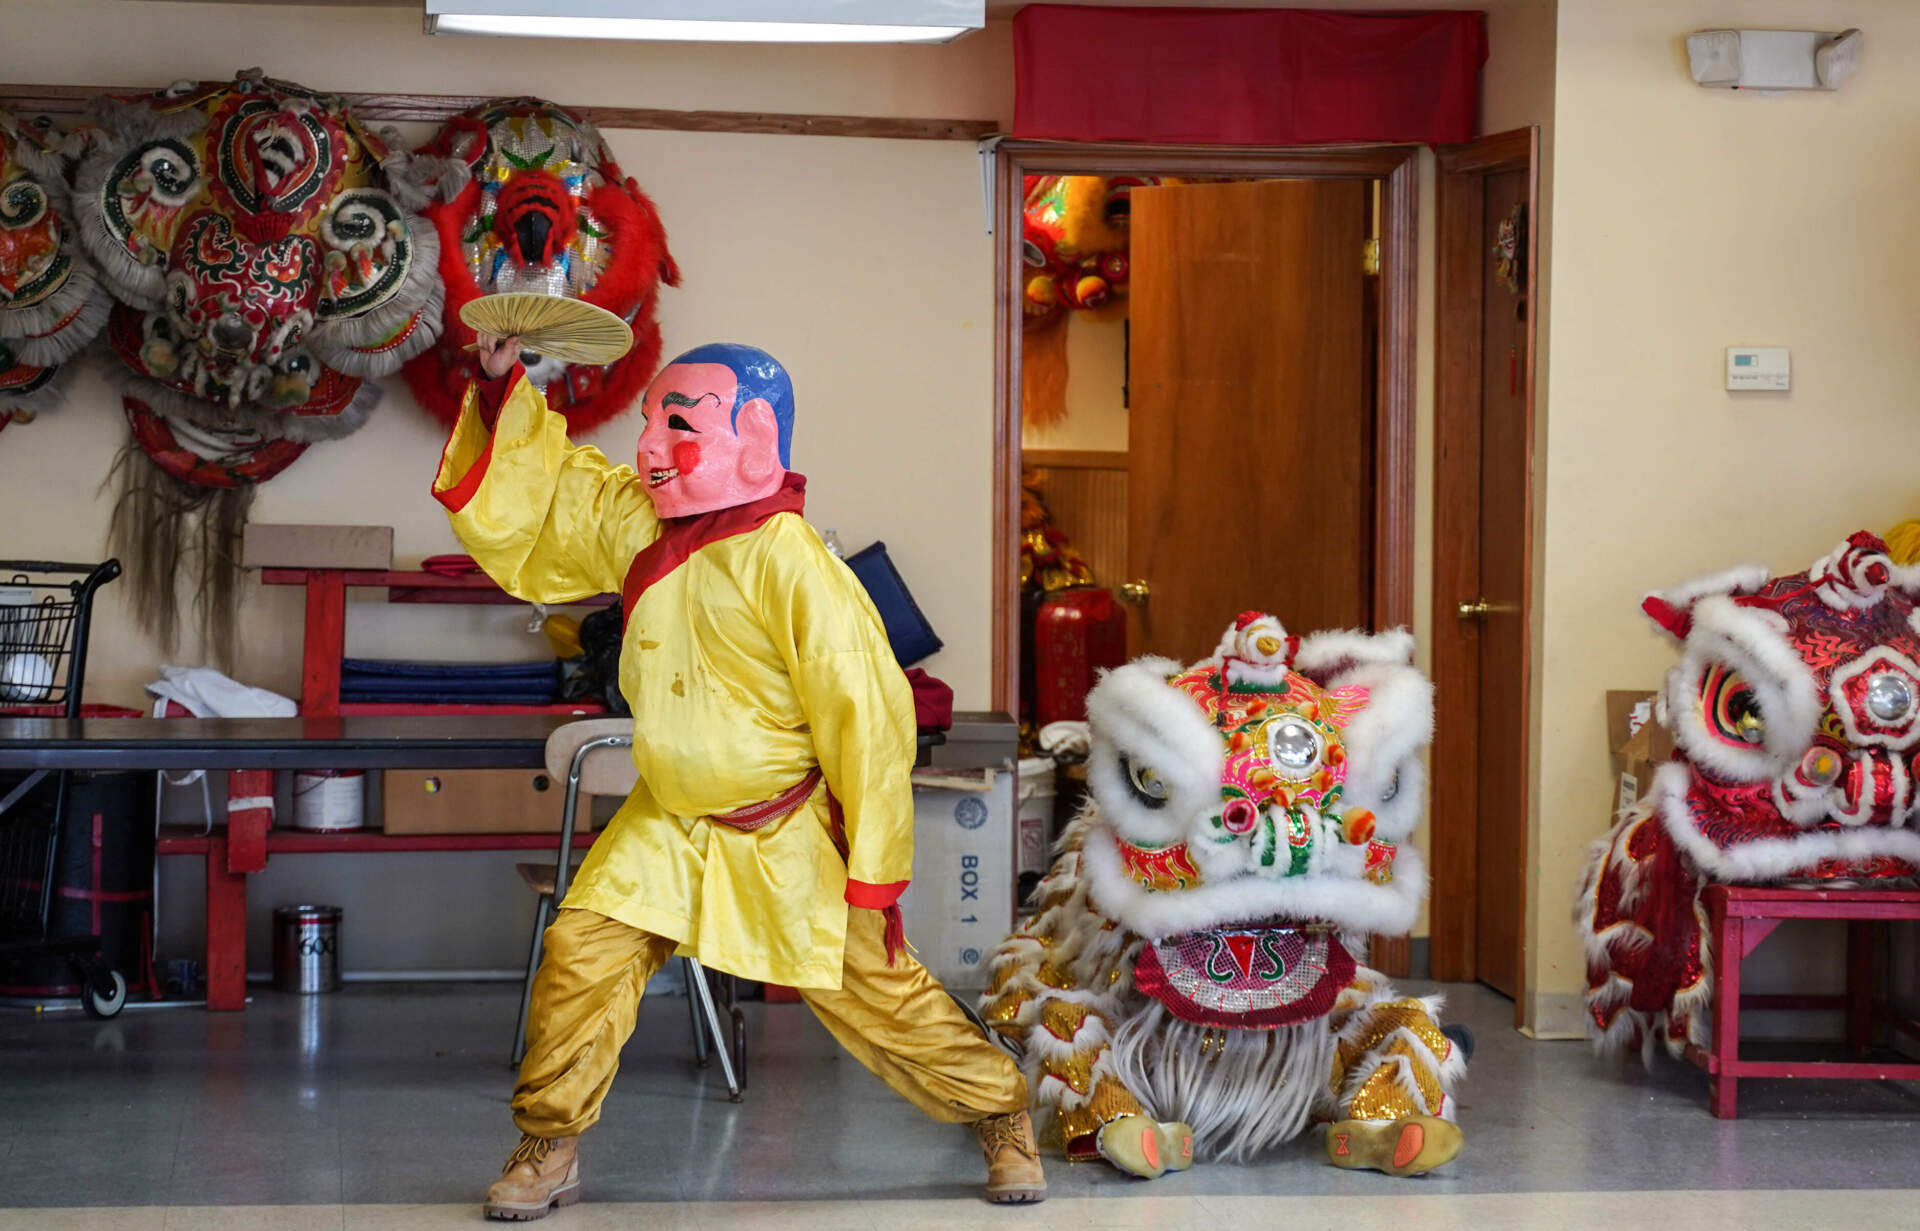 A Buddha introduces a lion to the stage in a parade rehearsal at the Boston Wong Family Benevolent Association practice room. (Cici Yu/WBUR)